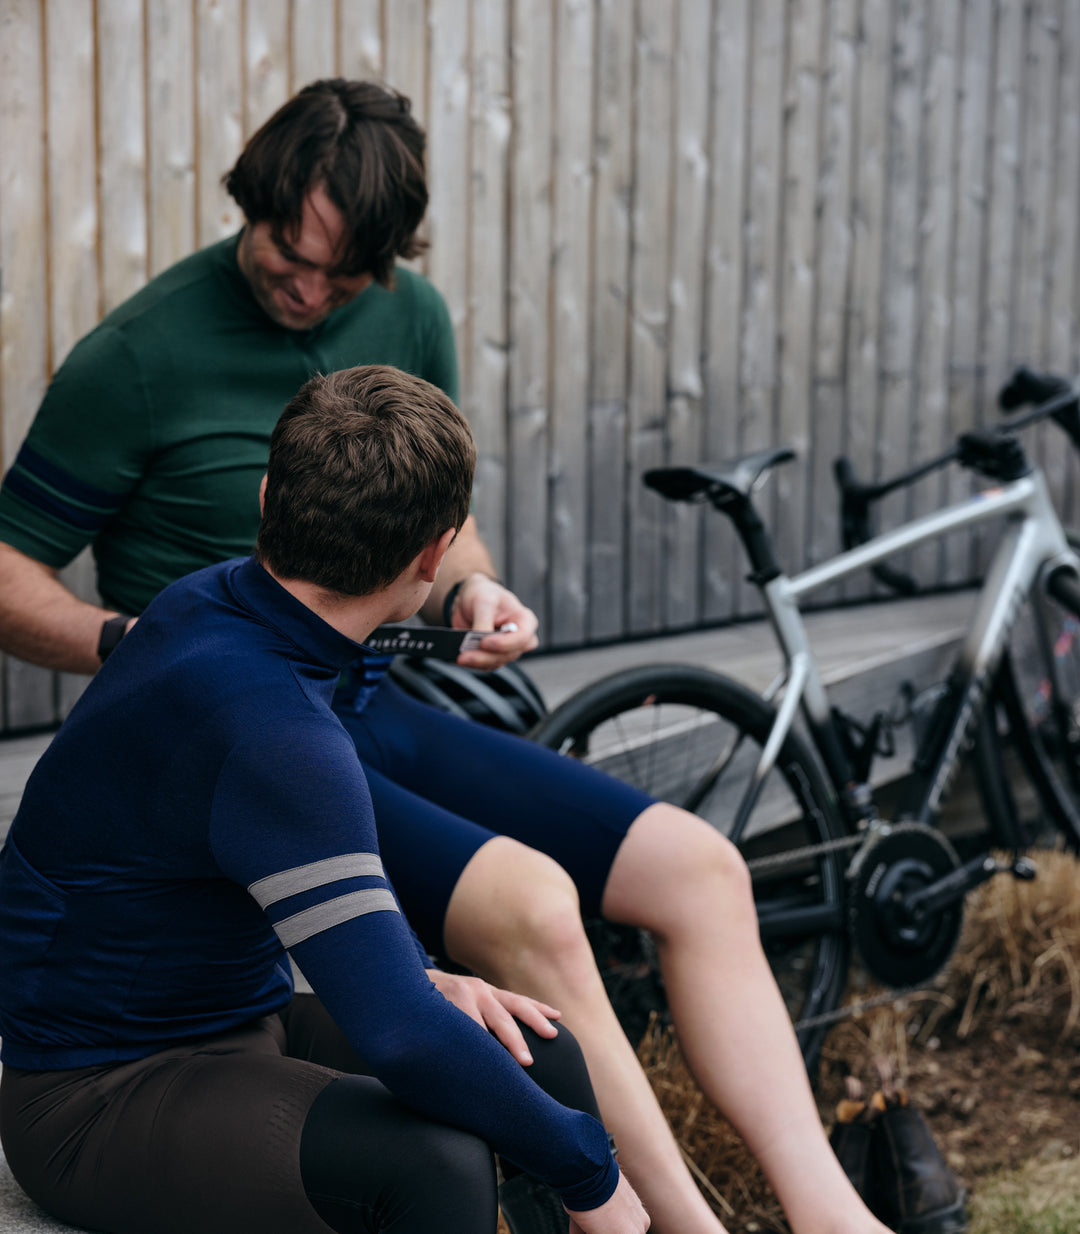 Pinebury Rangeley Long Sleeve Merino Wool Cycling Jersey in Atlantic Blue, Two male cyclist sitting and smiling in conversation while they get ready. A black and silver bike is leaning against the shed in the background.